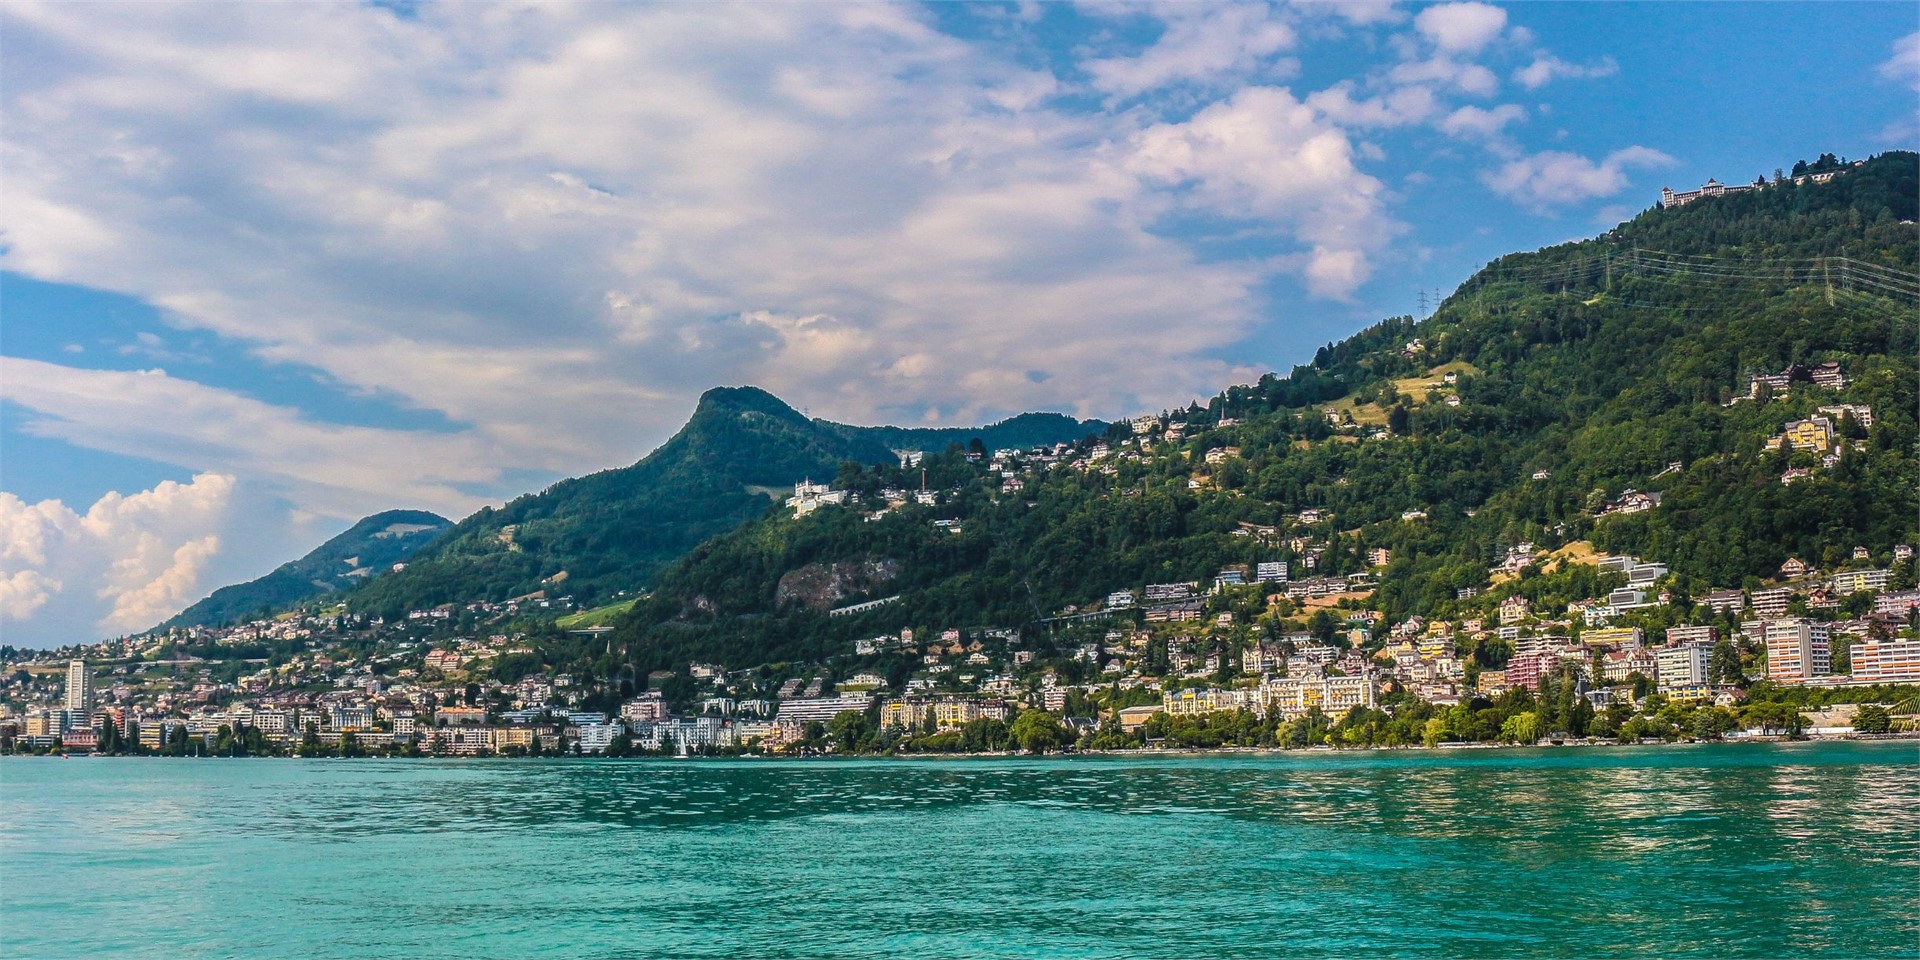 Book your trip to the Jazz Festival in Montreux
